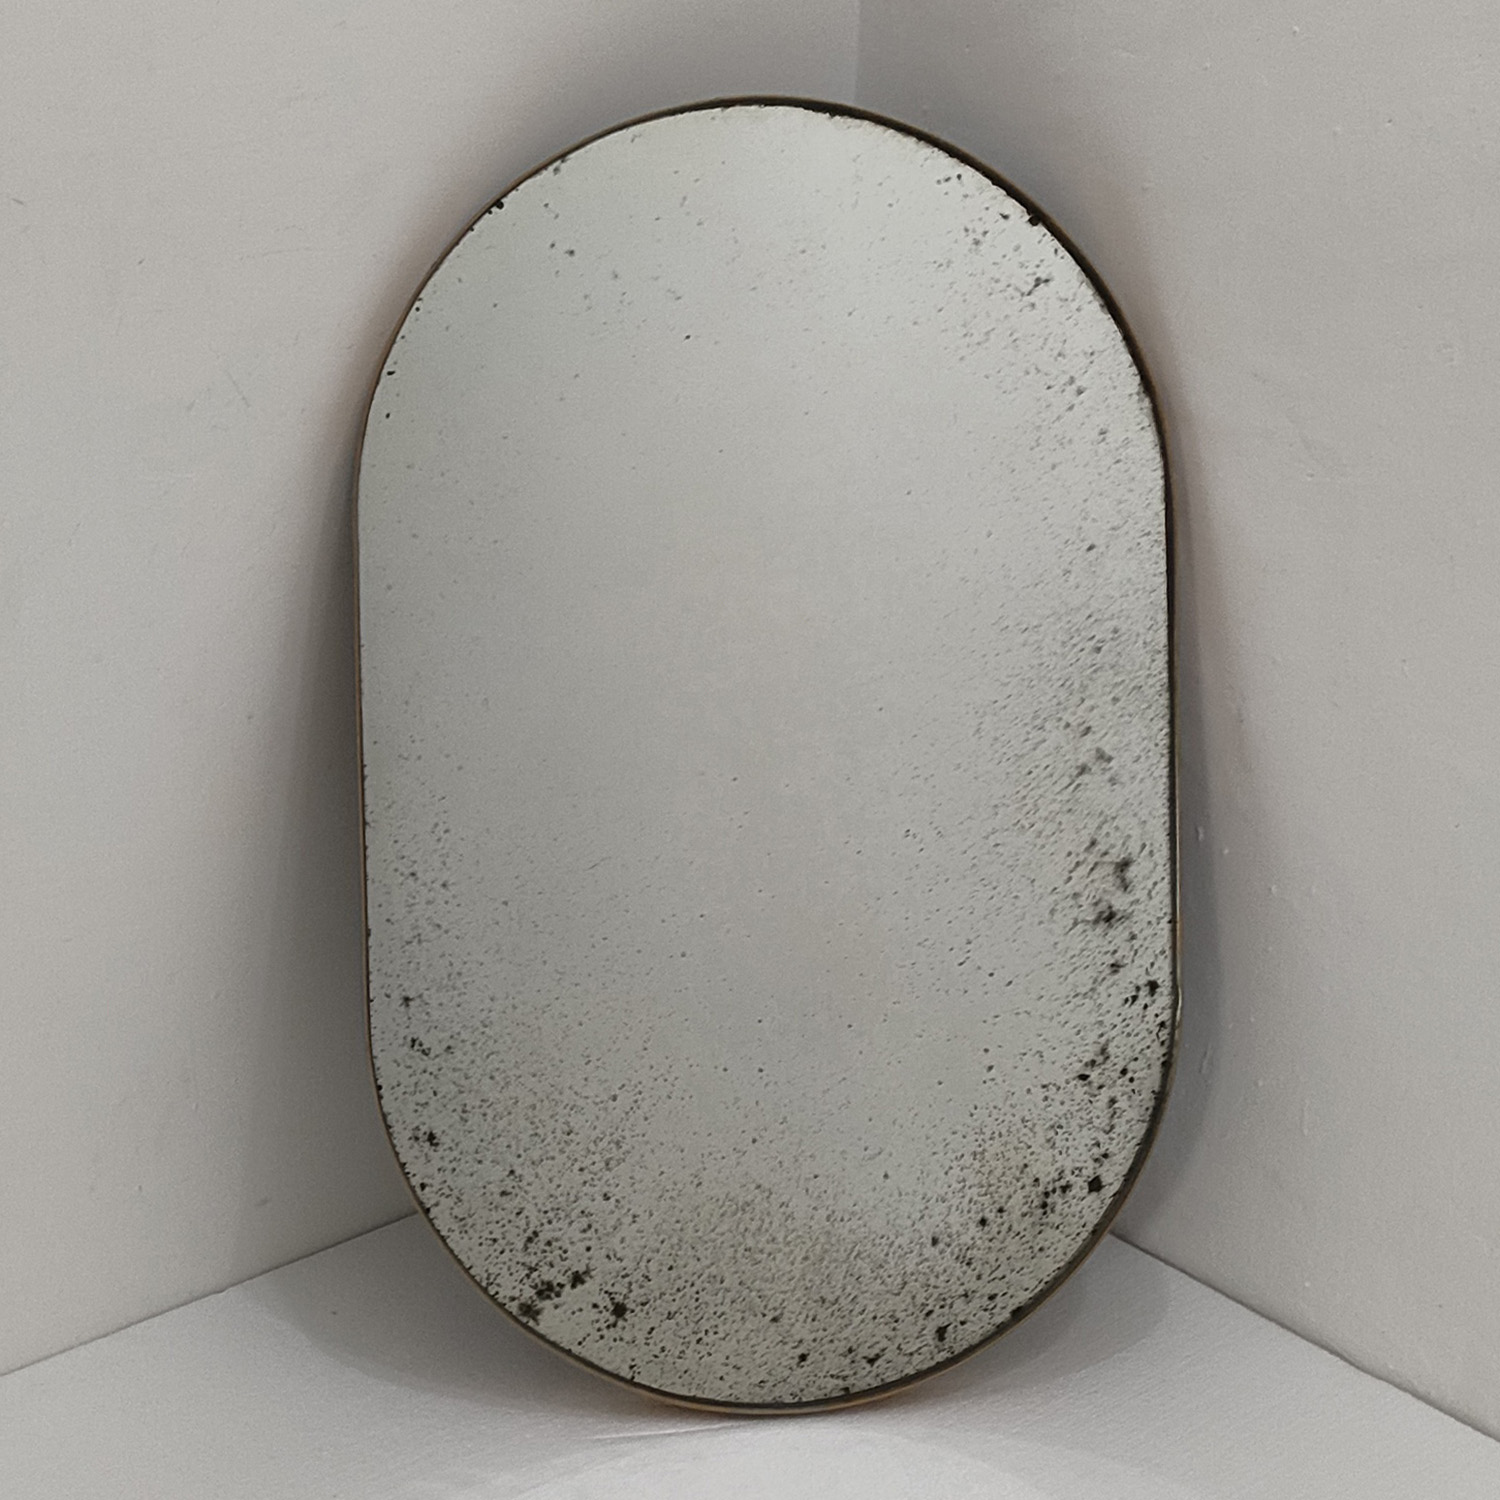 Who Says Antique Wall Mirrors Are Out Of Style? See And Realize Its Eternal Beauty